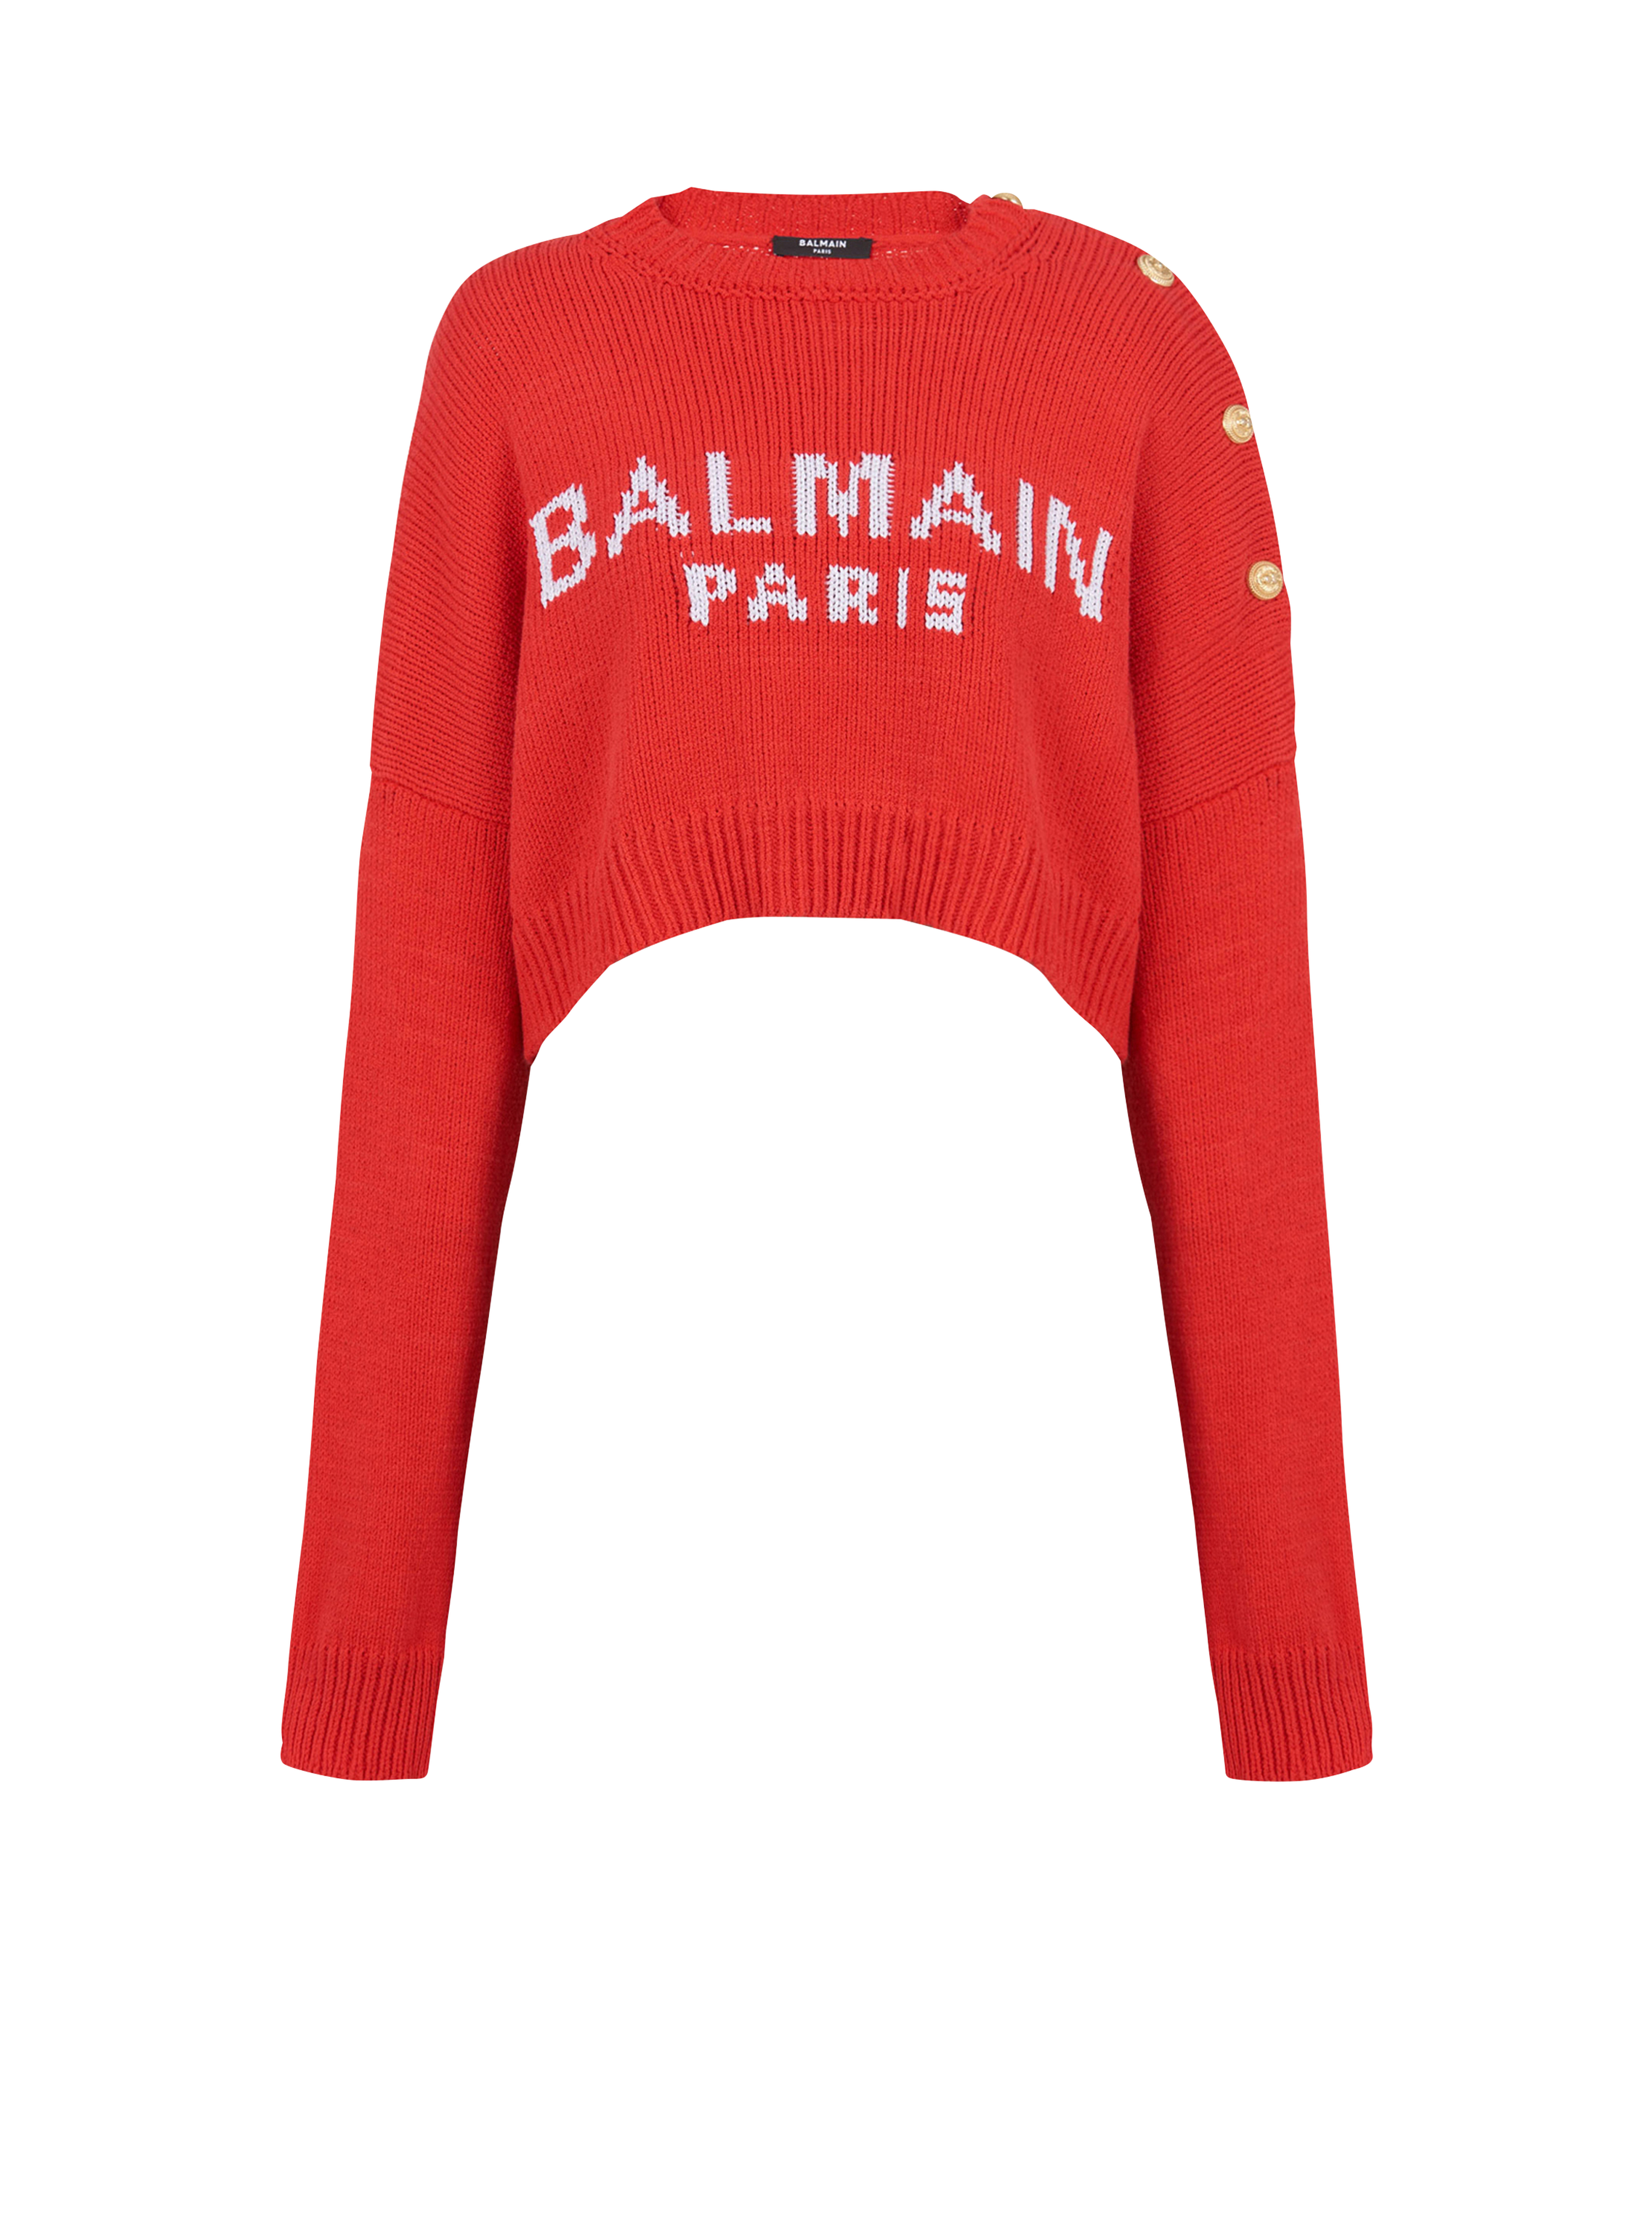 HIGH SUMMER CAPSULE - Cropped knit sweater with Balmain logo print, red